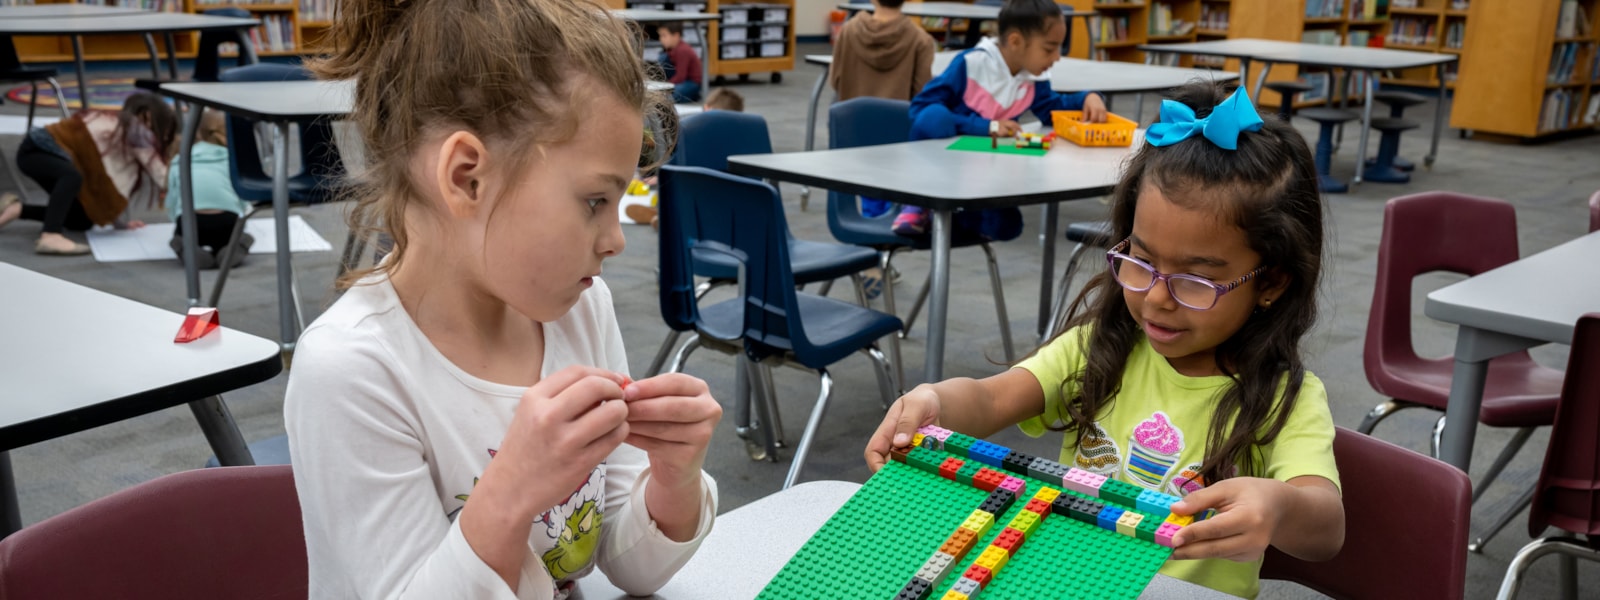 two girls playing with Lego bricks